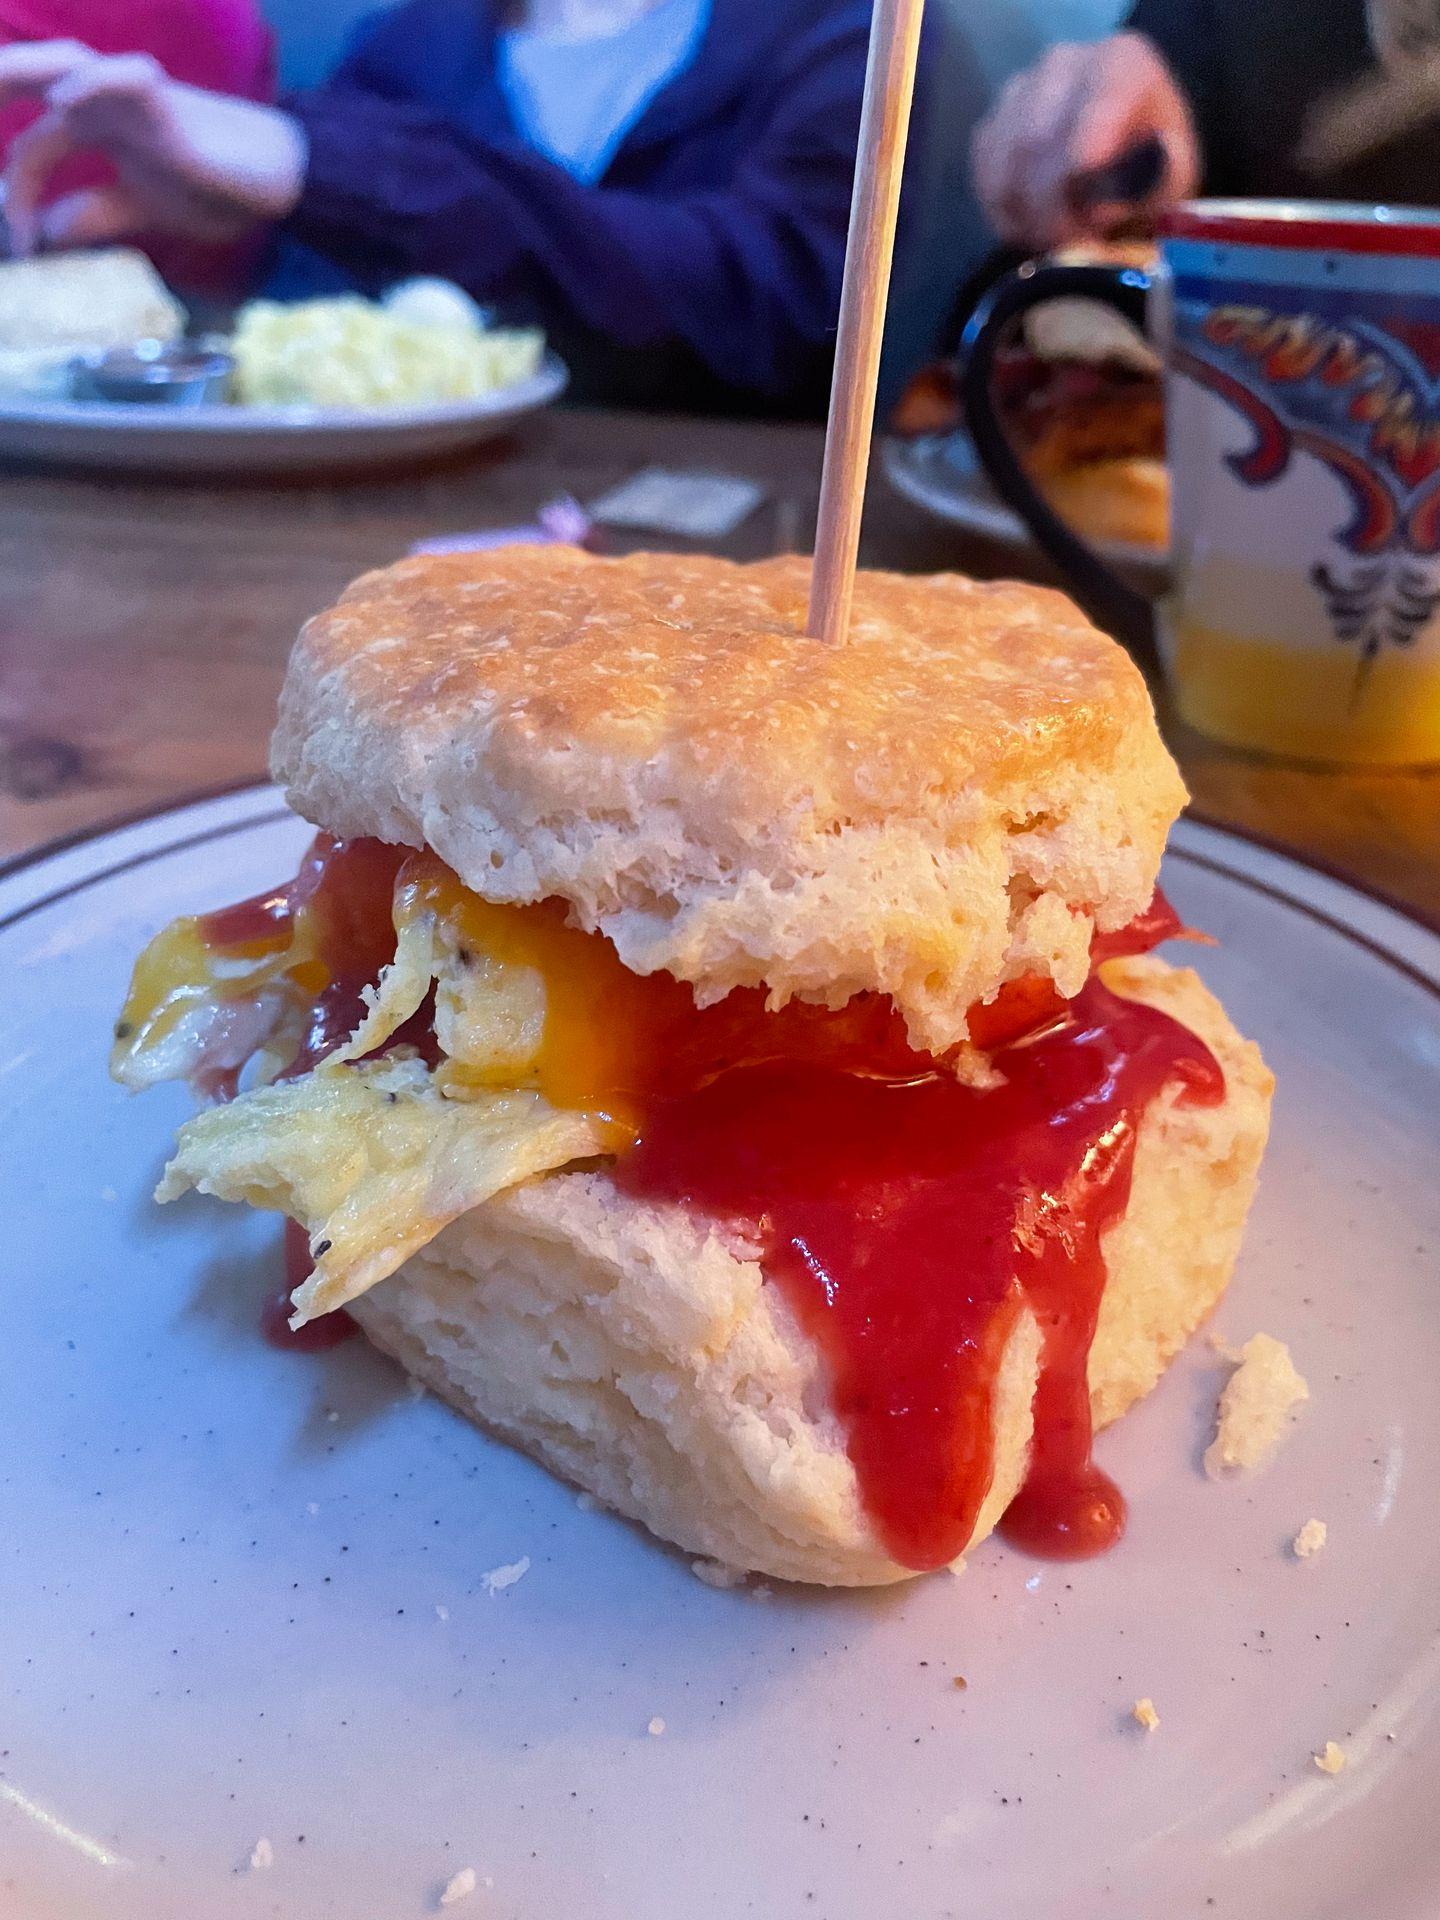 A biscuit sandwich with egg and jam.